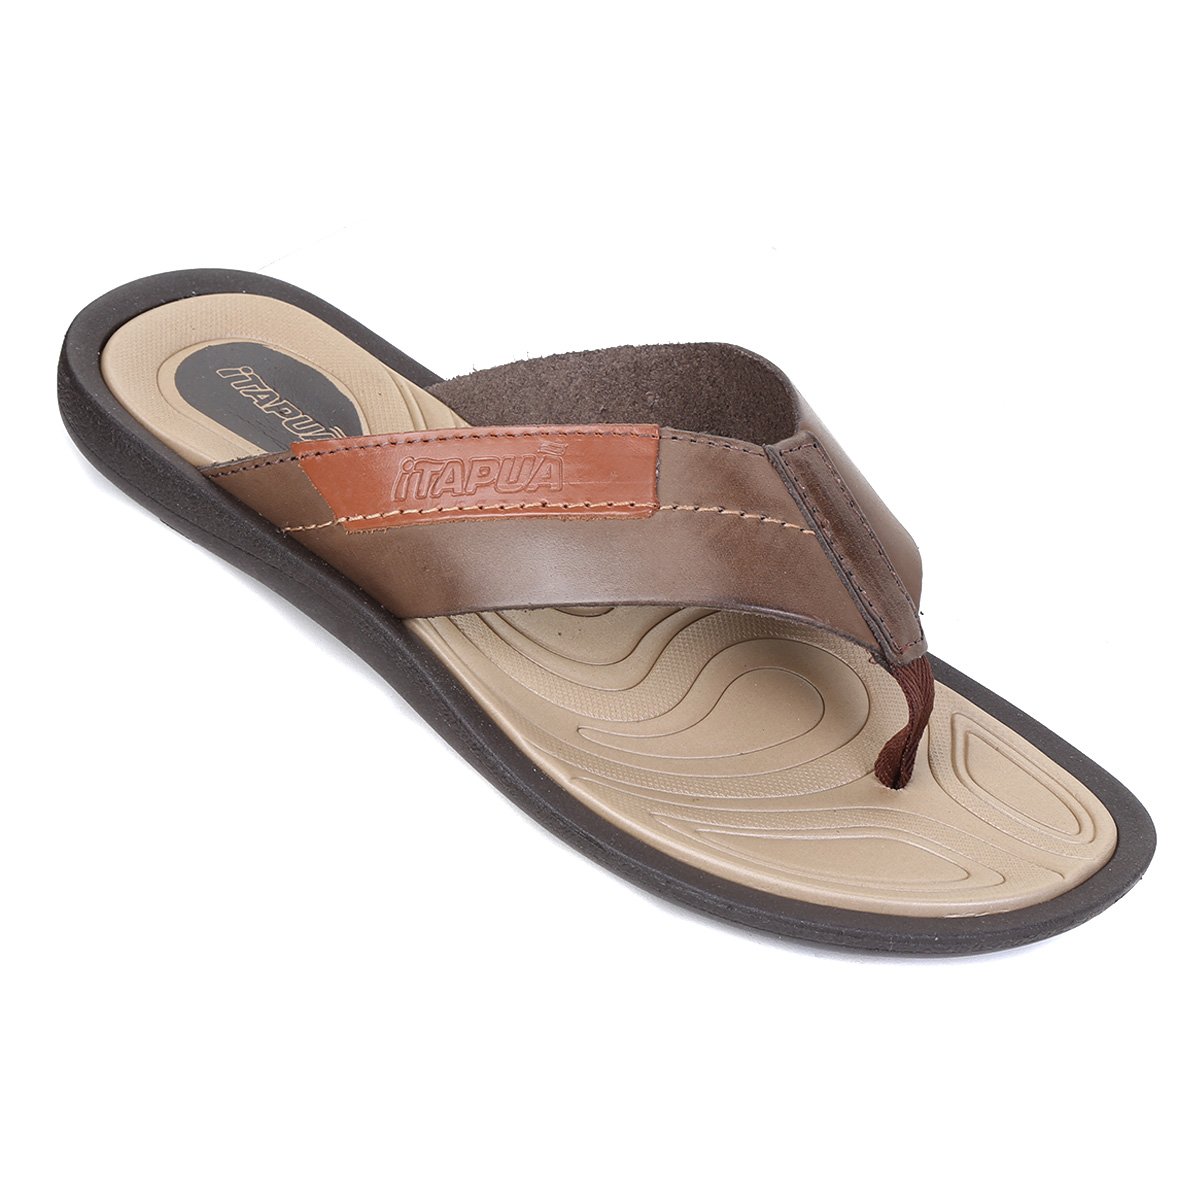 Chinelo Itapuã DT Masculino